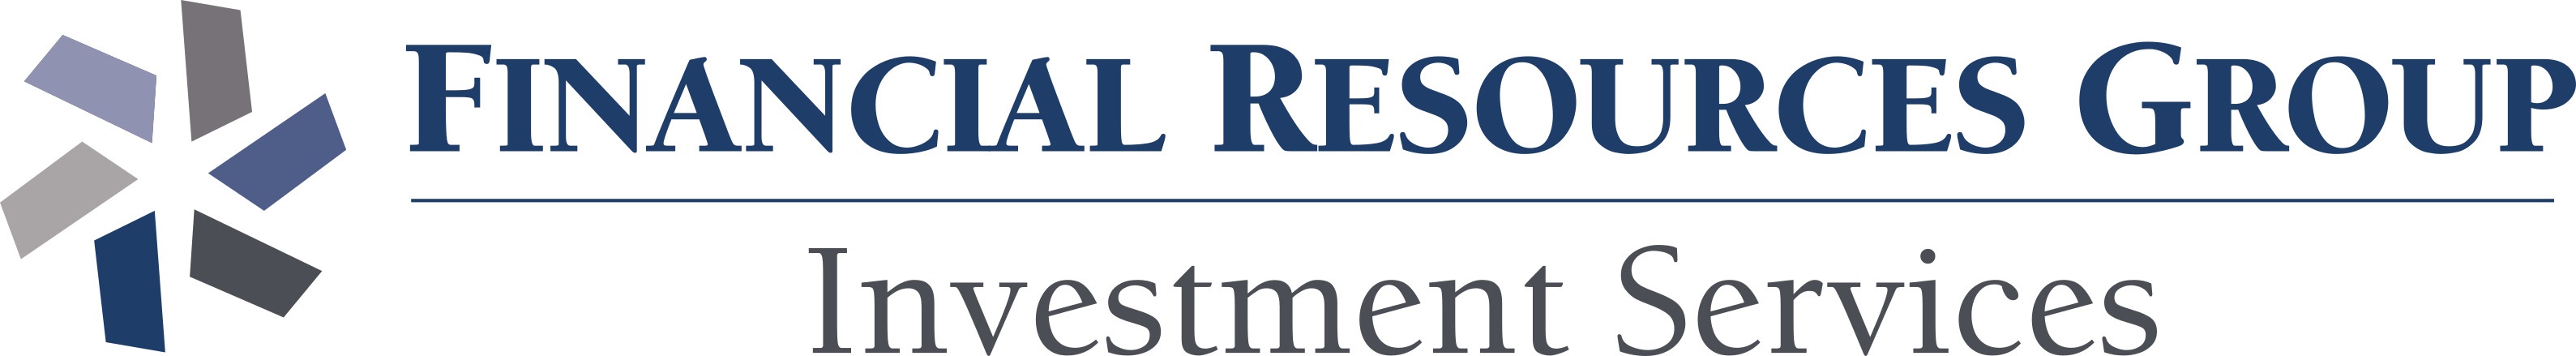 Financial Resources Group Investment Services's Logo